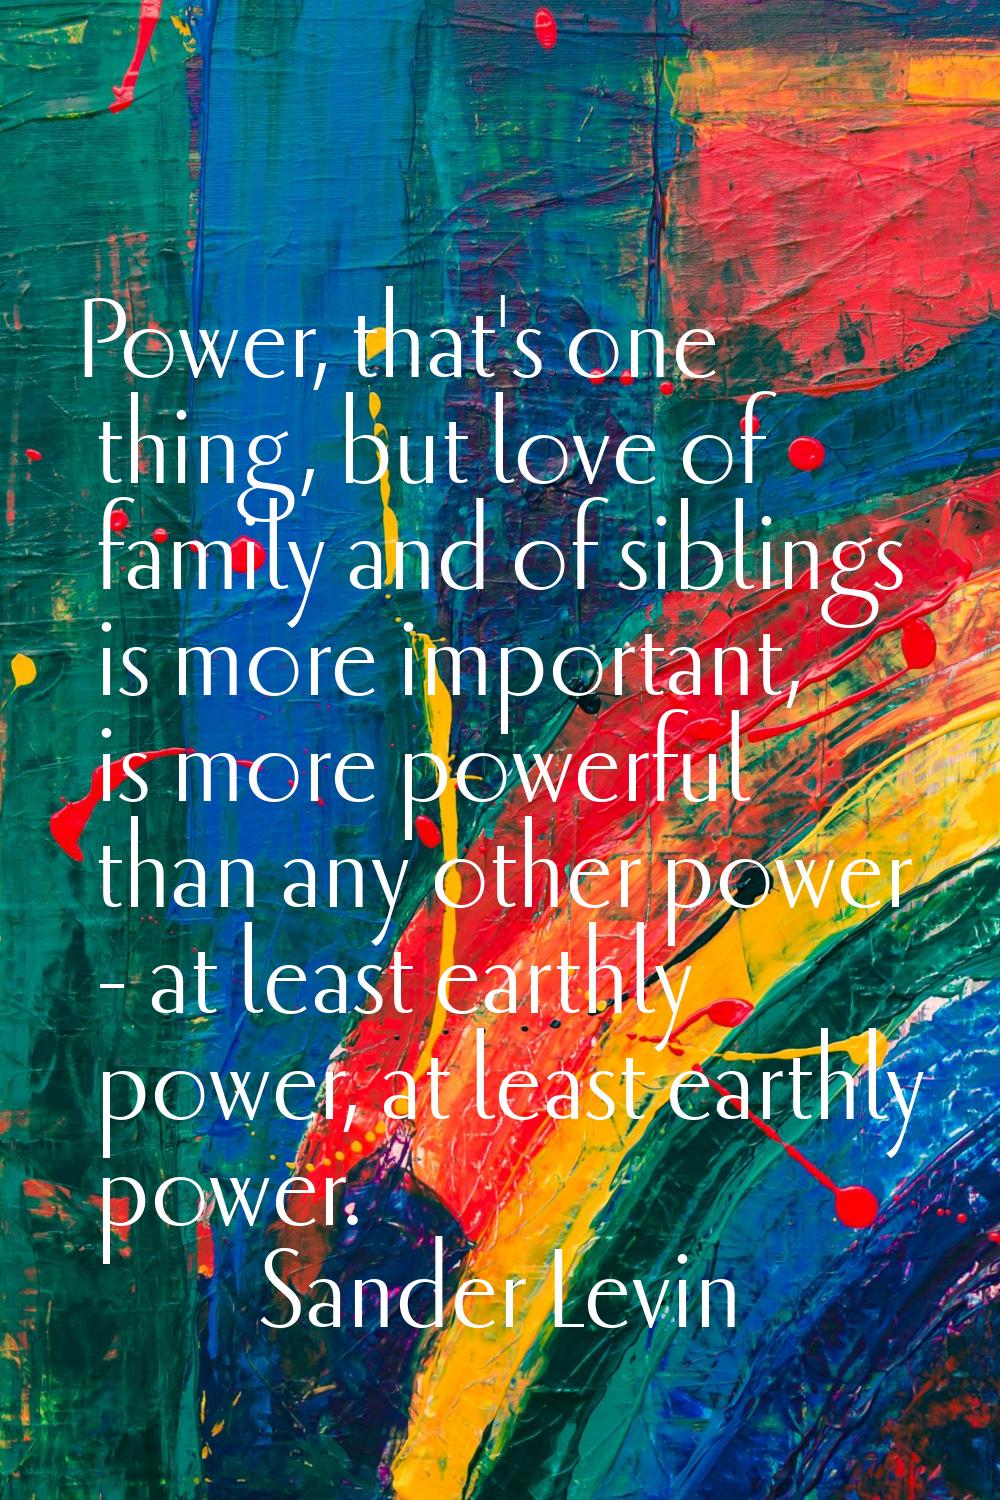 Power, that's one thing, but love of family and of siblings is more important, is more powerful tha